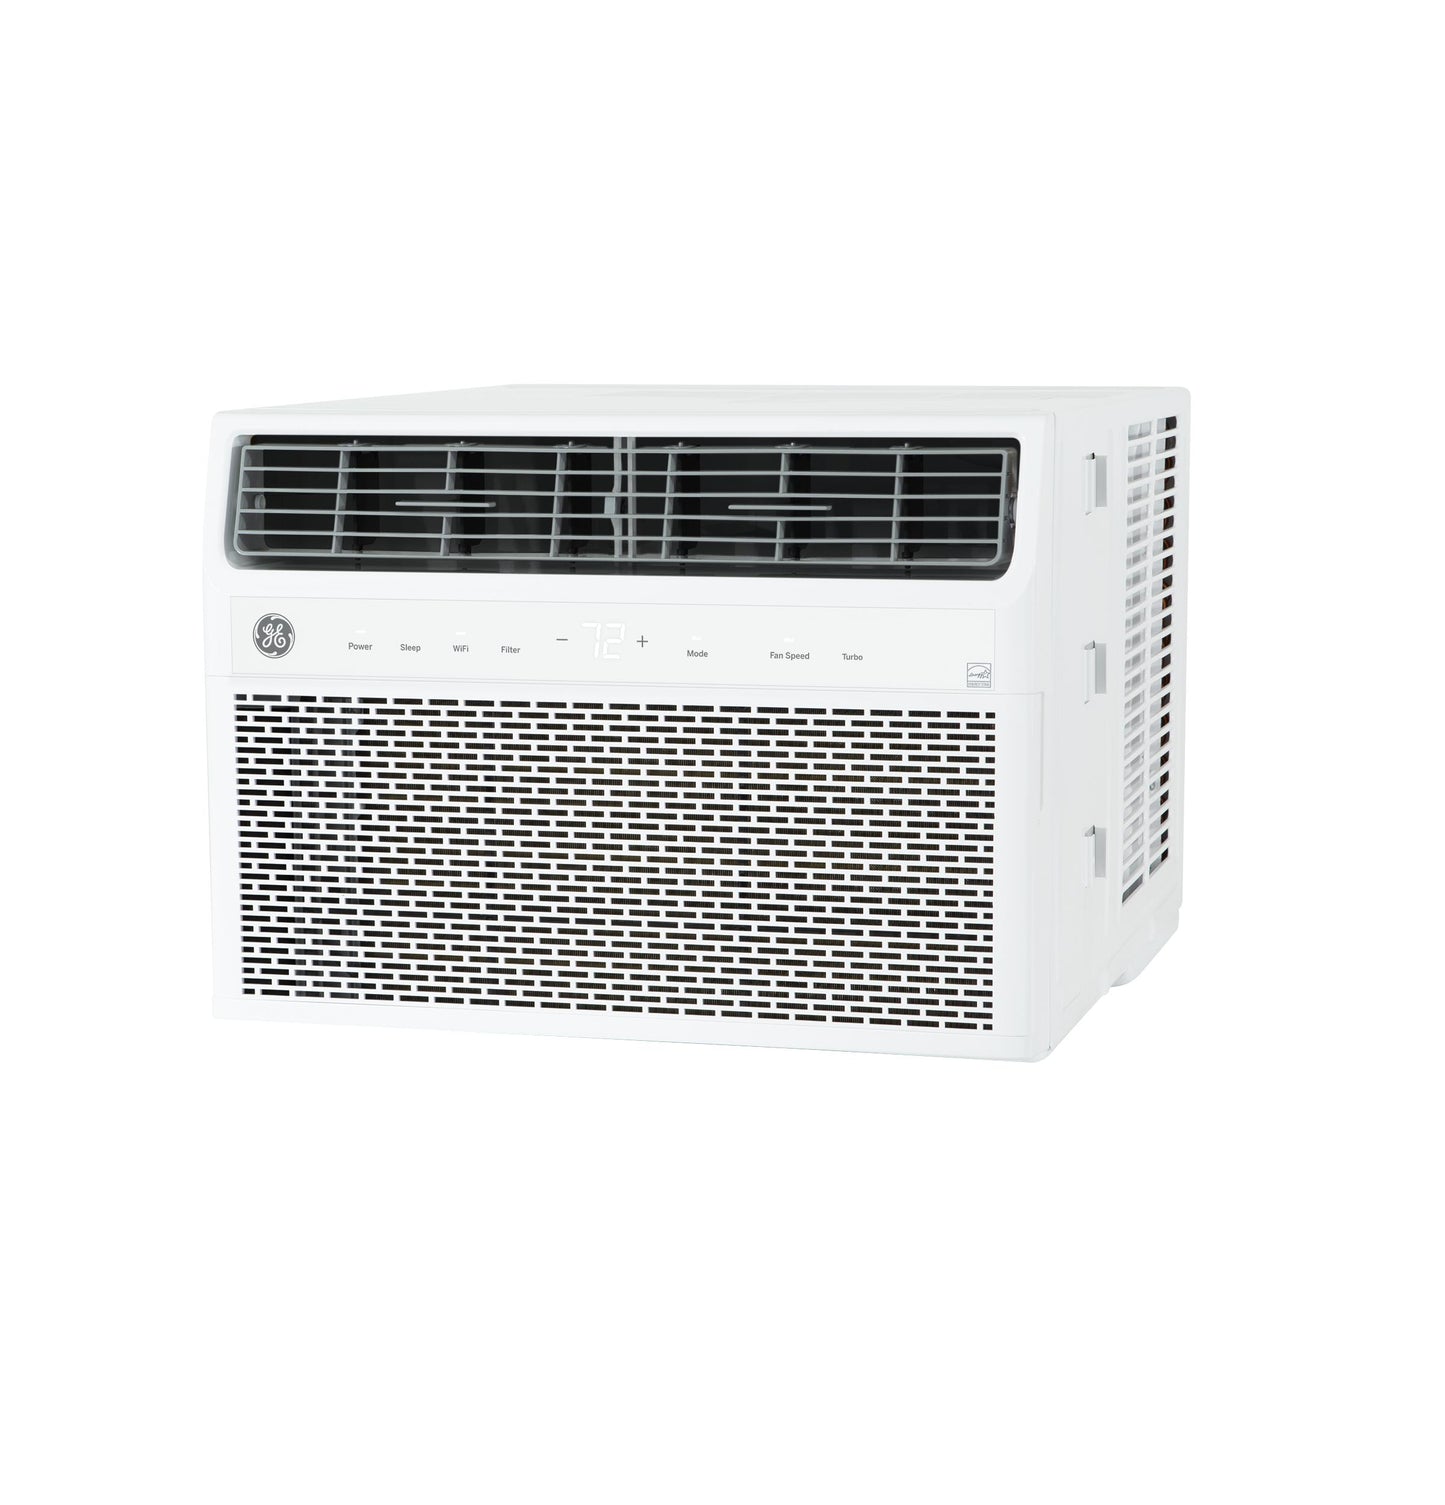 Ge Appliances AKLK14AA Ge® Energy Star® 14,000 Btu Smart Electronic Window Air Conditioner For Large Rooms Up To 700 Sq. Ft.